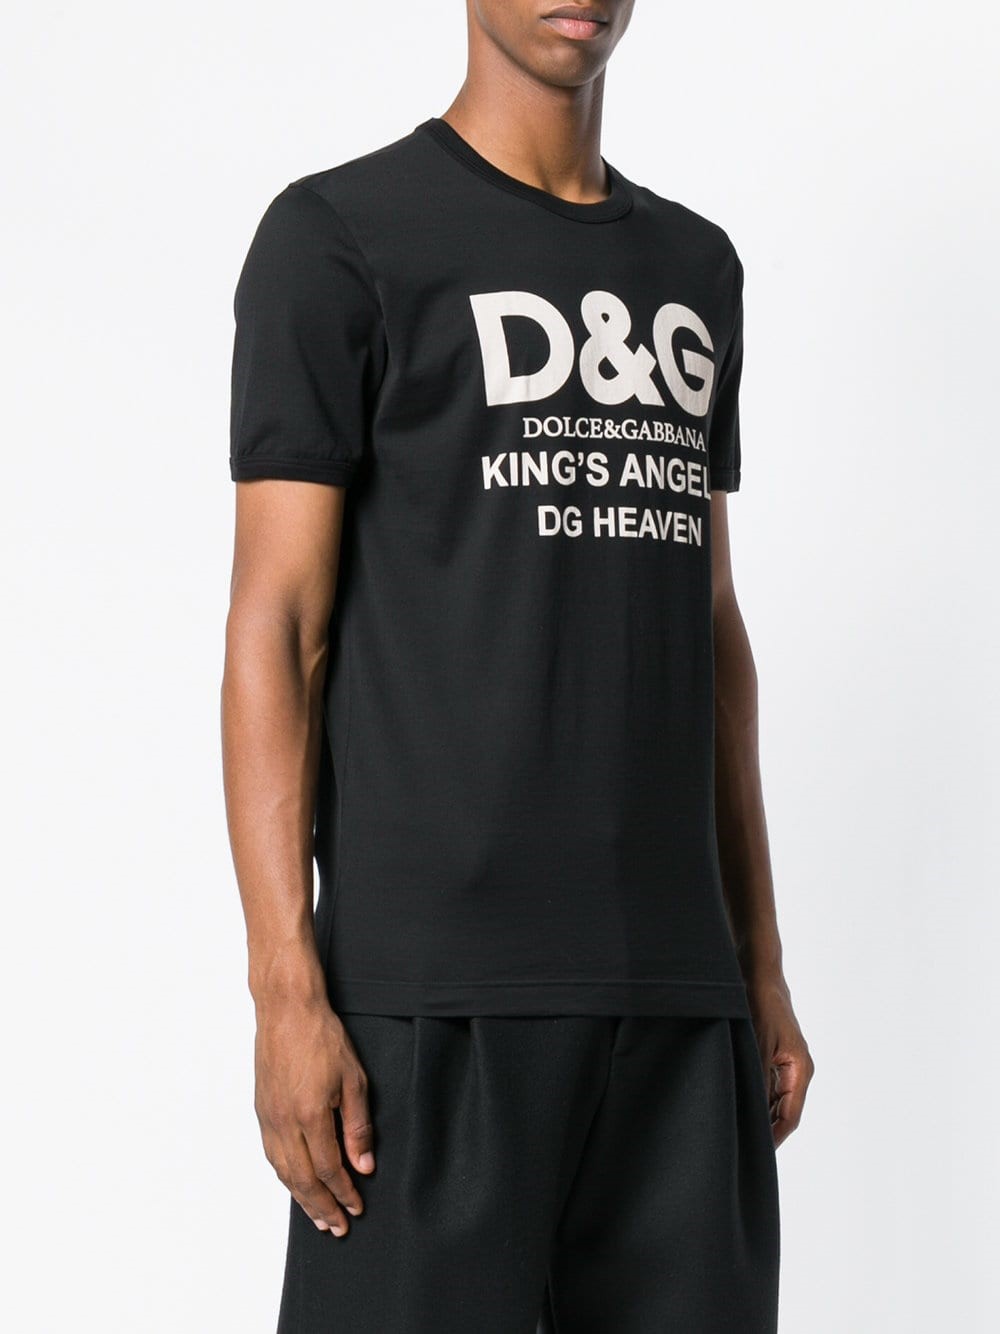 dolce & gabbana PRINTED T-SHIRT available on montiboutique.com - 23547